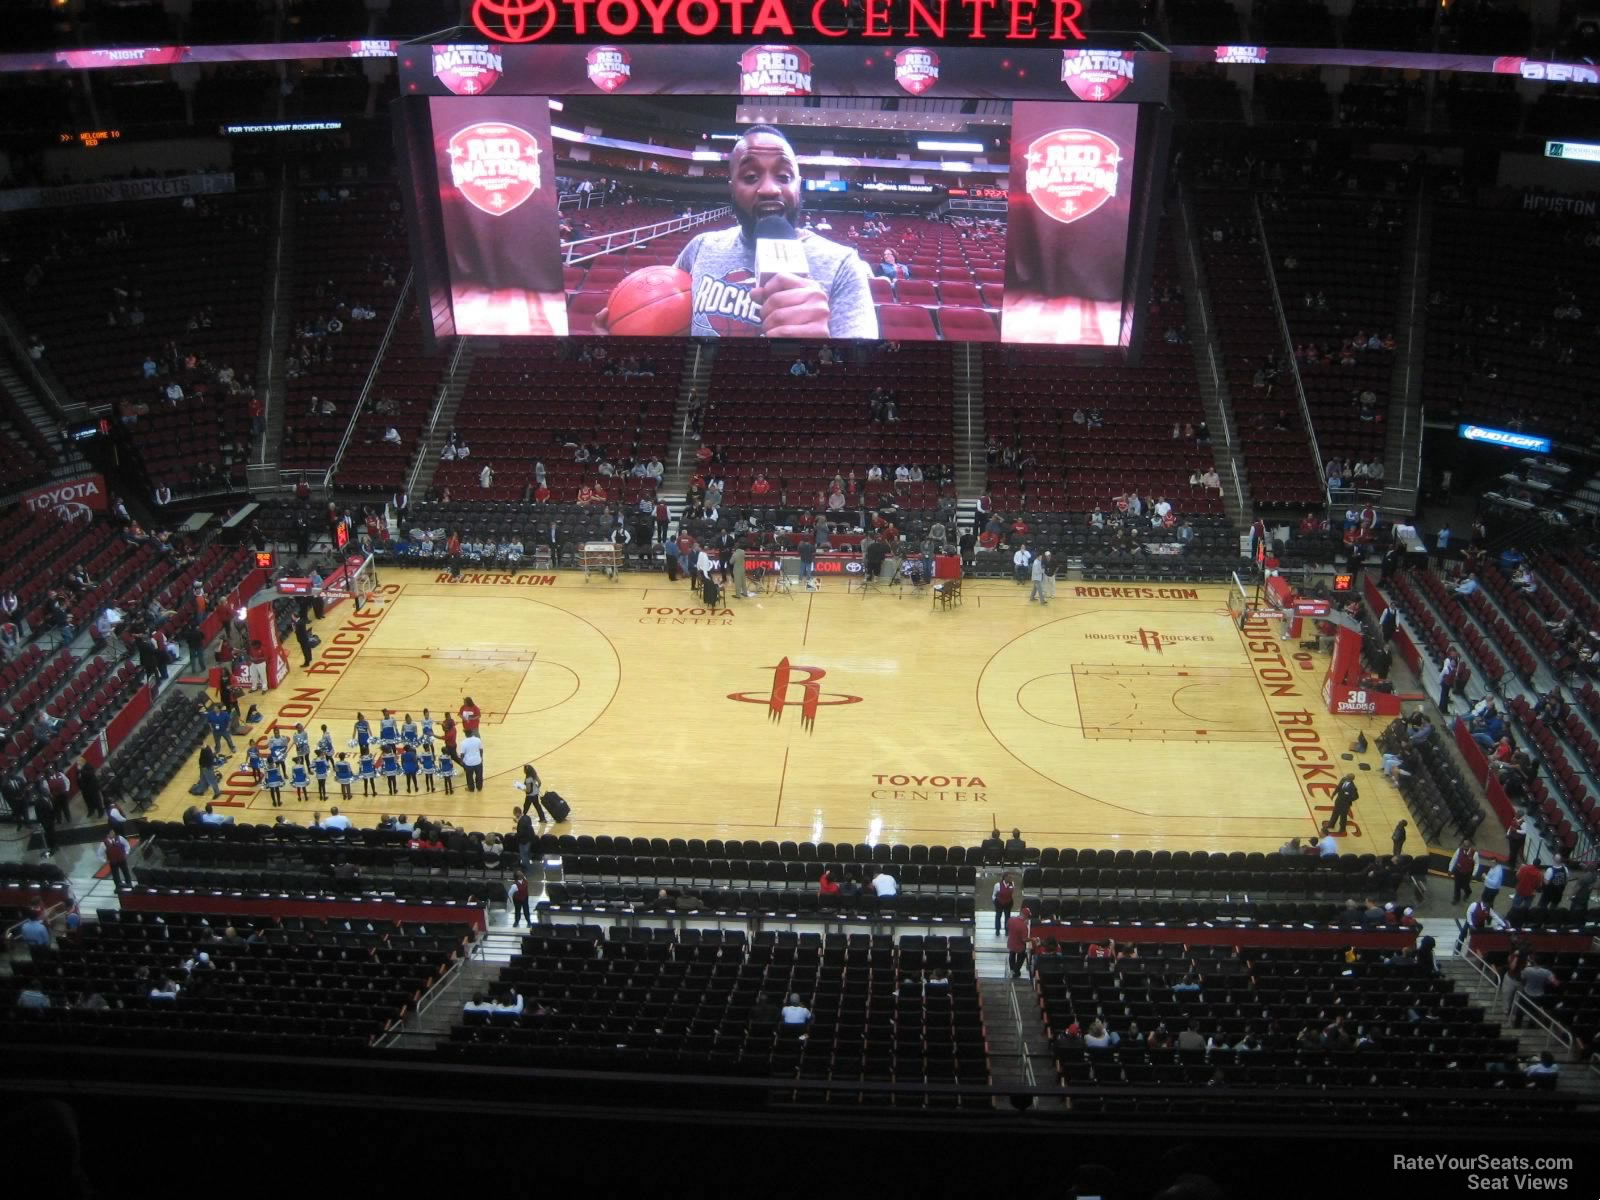 section 409, row 6 seat view  for basketball - toyota center